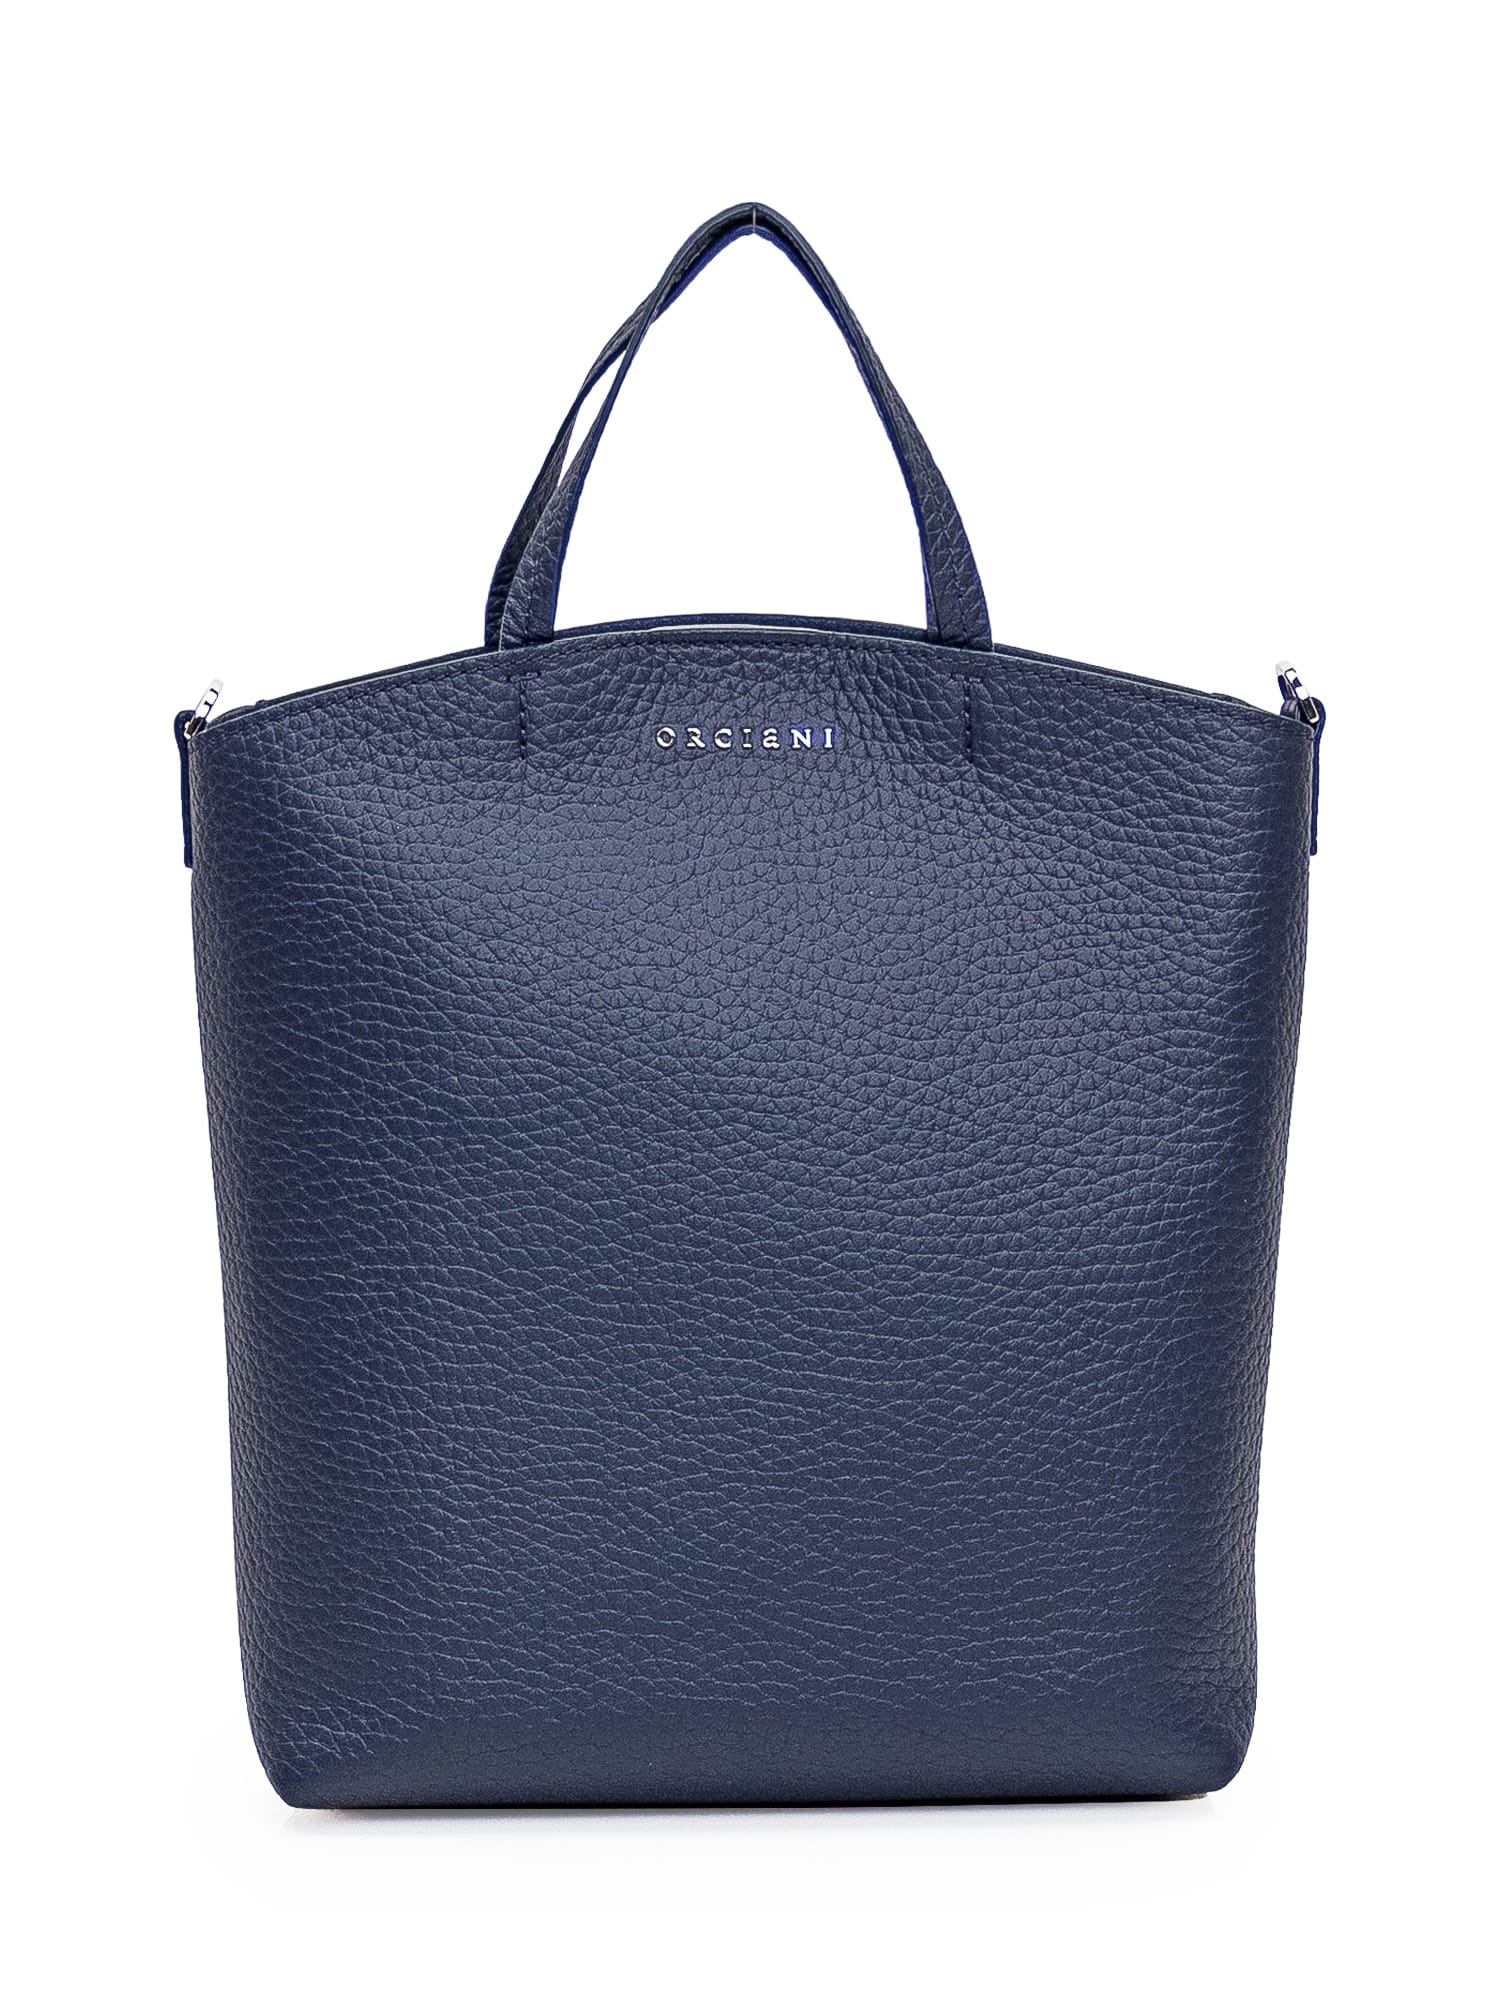 Orciani Ladylike Small Shopper Bag In Navy